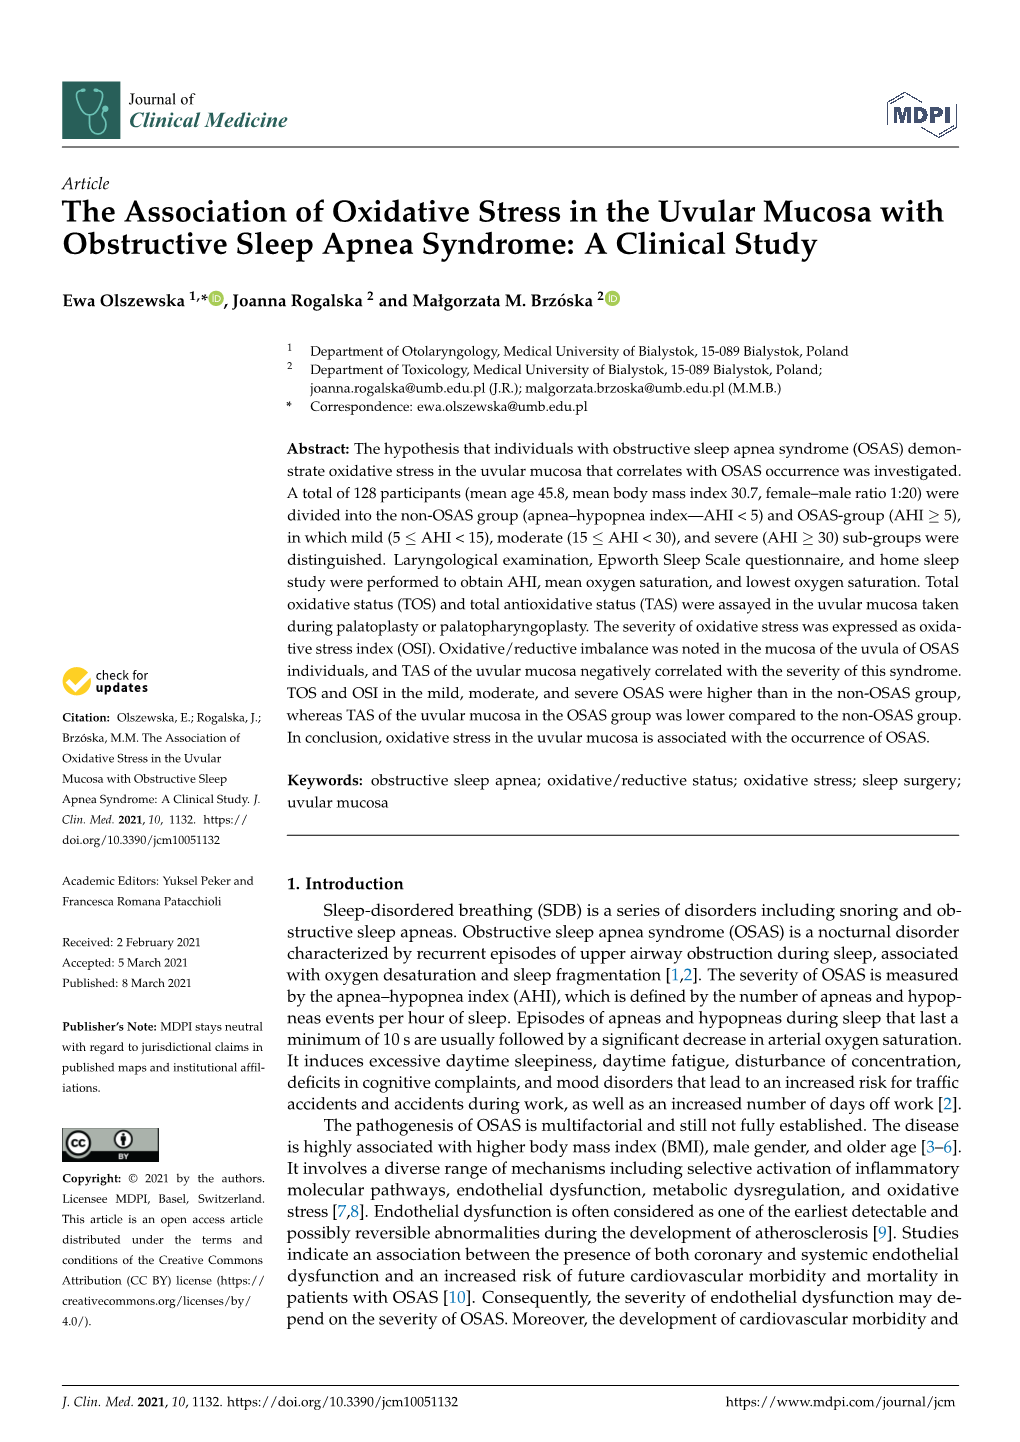 The Association of Oxidative Stress in the Uvular Mucosa with Obstructive Sleep Apnea Syndrome: a Clinical Study